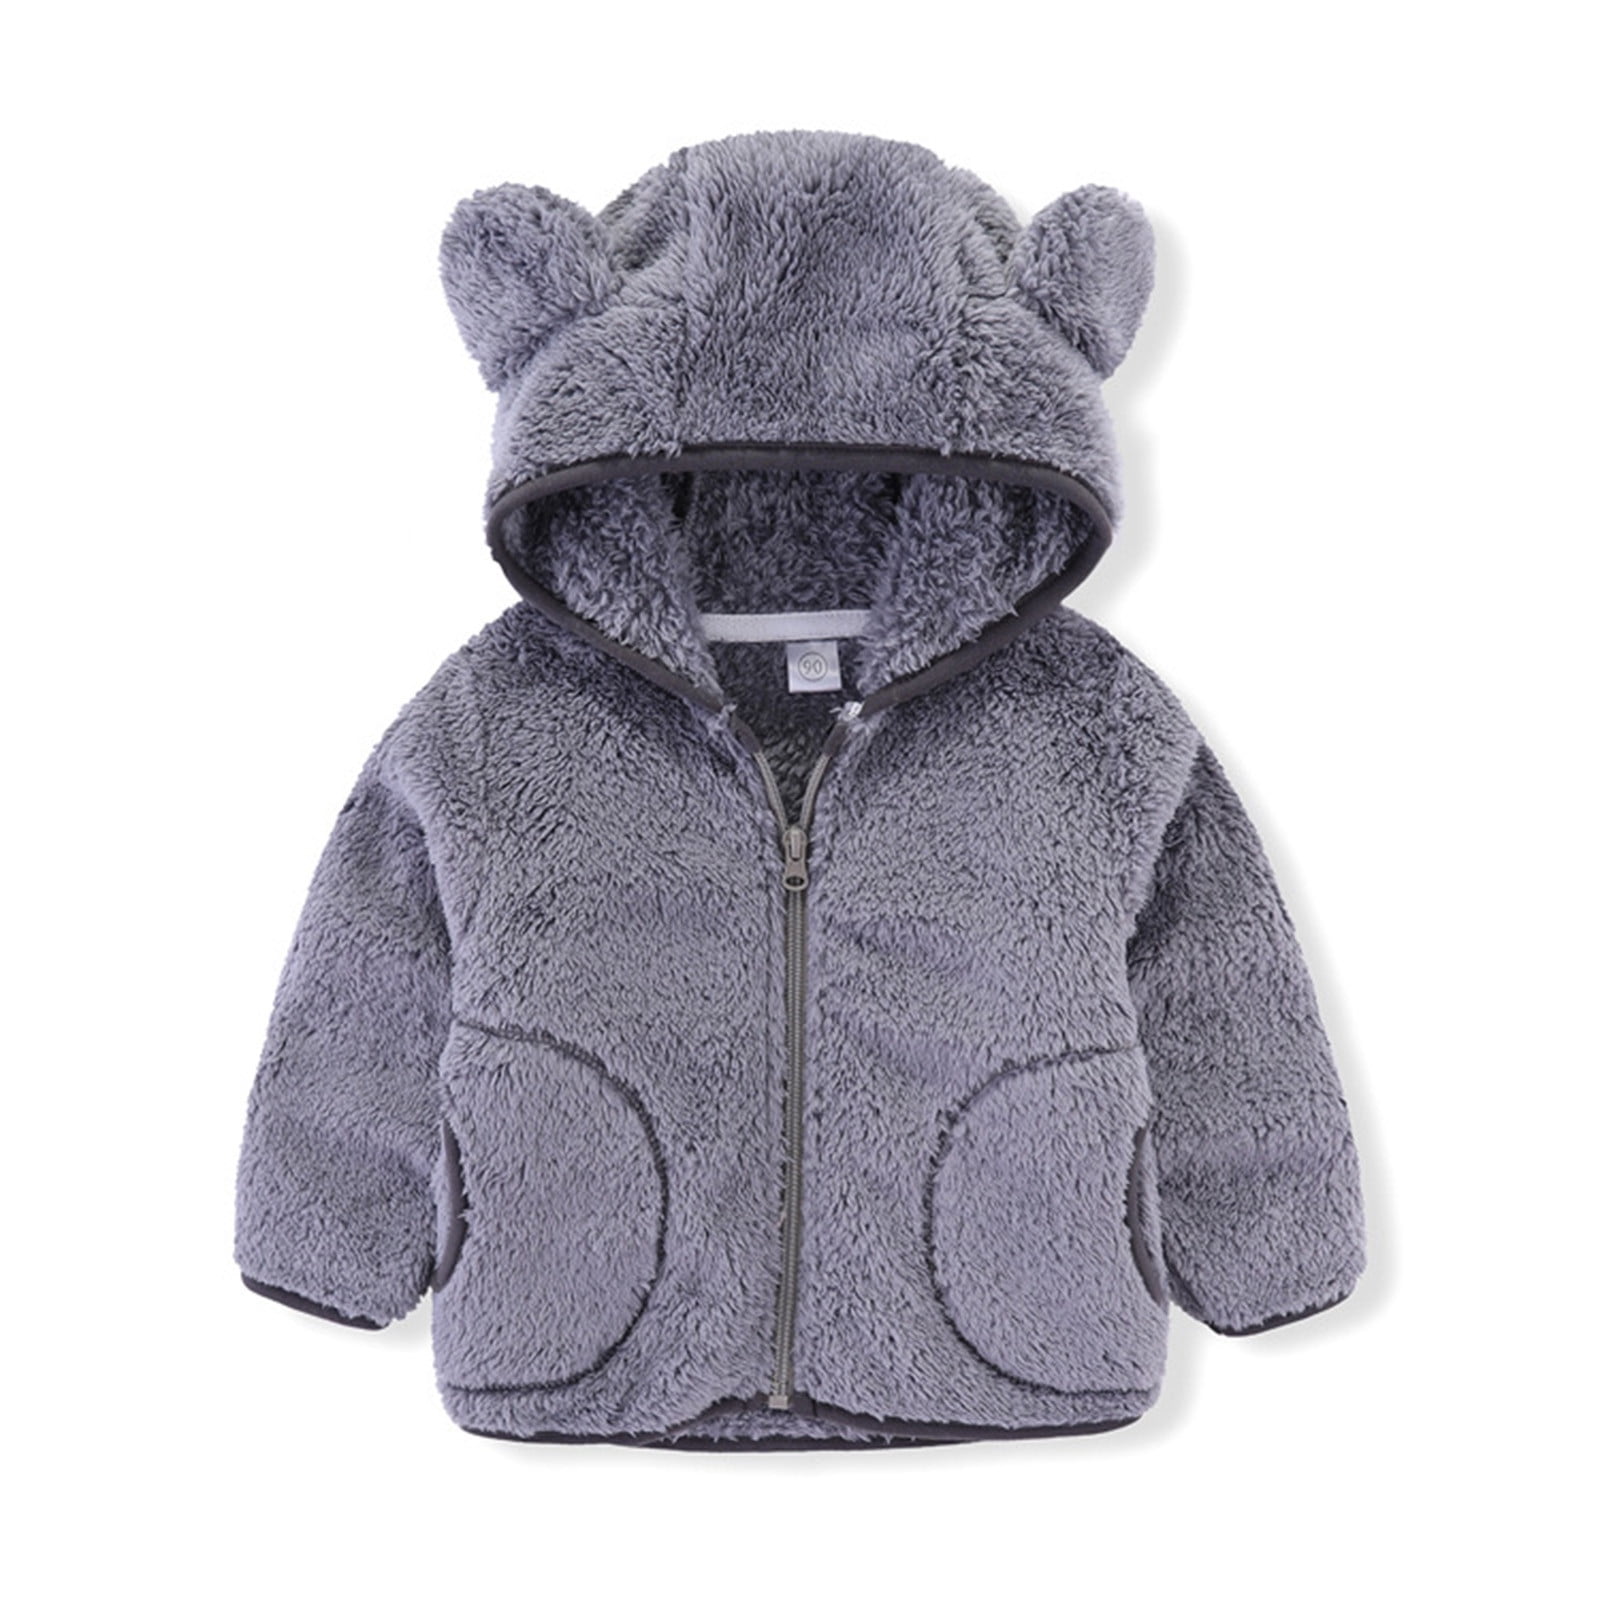 OCEAN-STORE Toddler Baby Girls Boys 18 Months-7T Long Sleeve Solid Hoodie Tops Fluffy Outfits Clothes